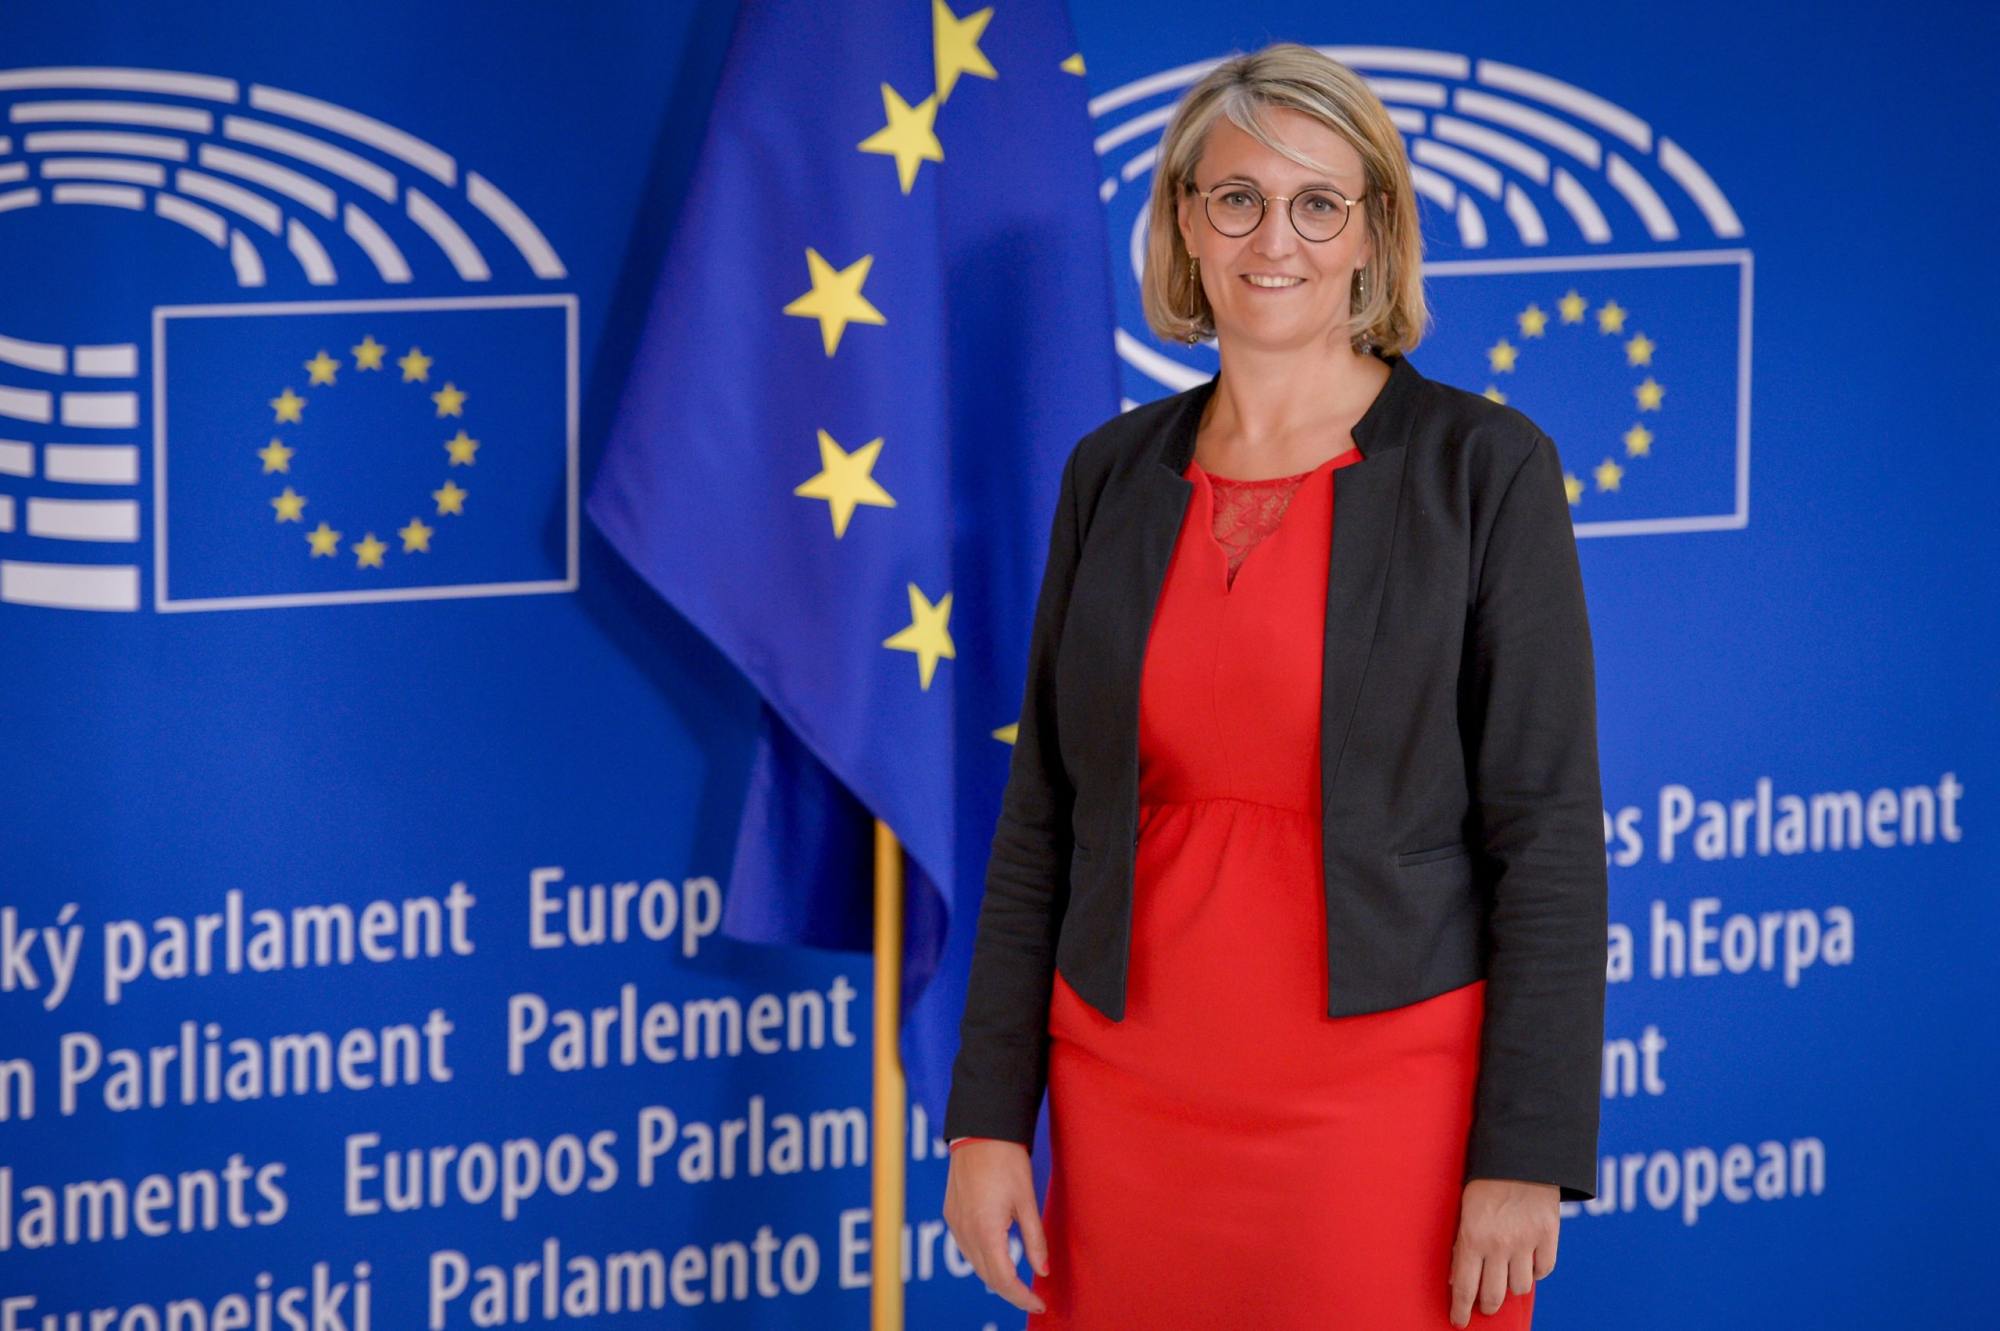 Marie-Pierre Vedrenne says a delegation from the European Parliament plans to visit Taiwan in December. Photo: Handout